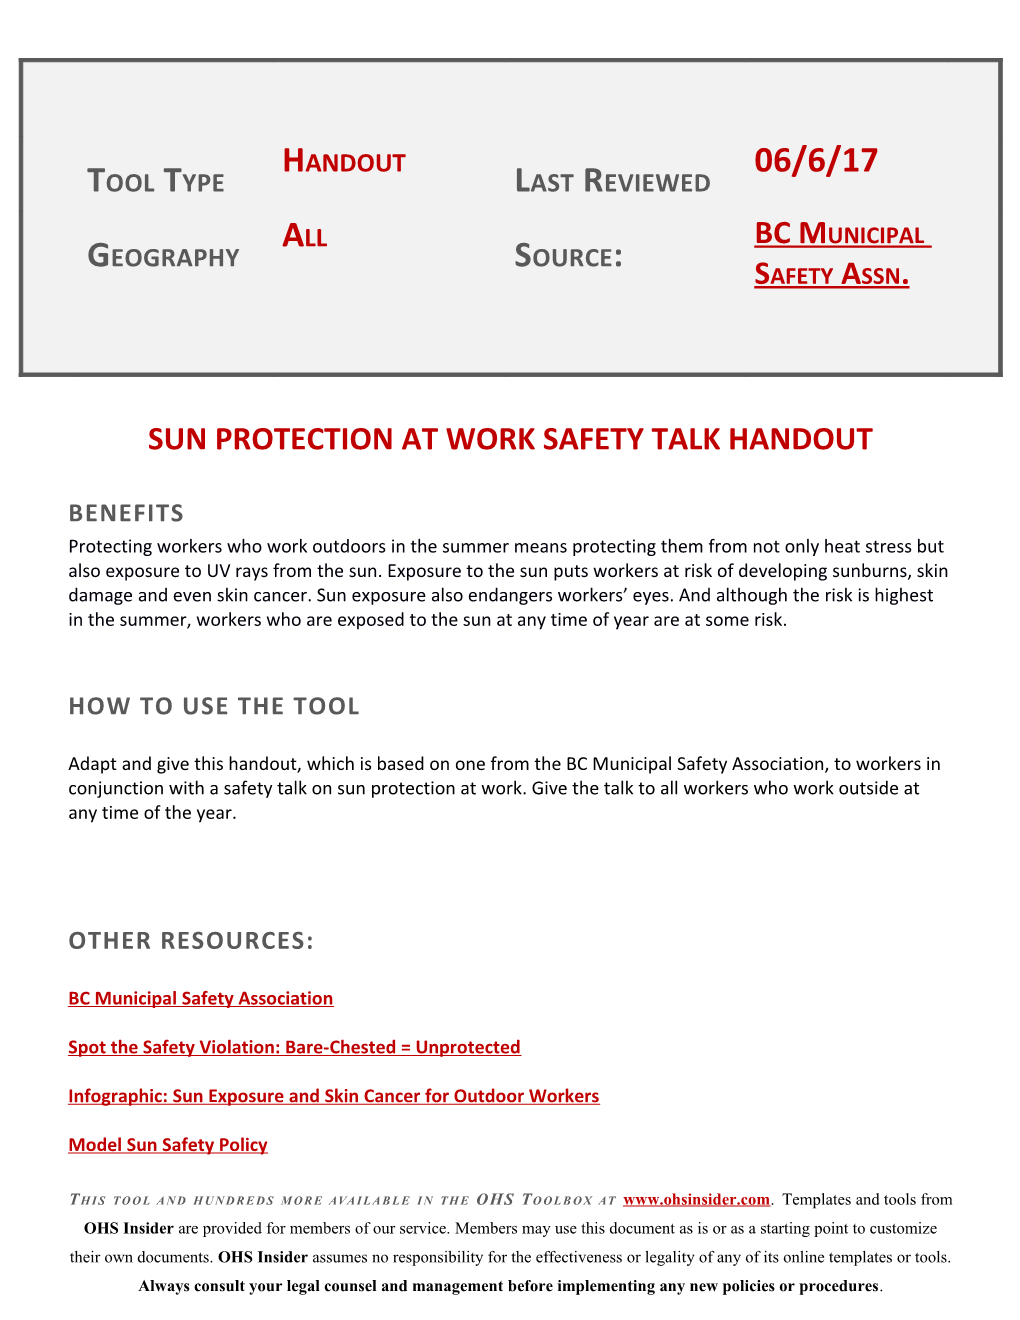 Sun Protection at Work Safety Talk Handout